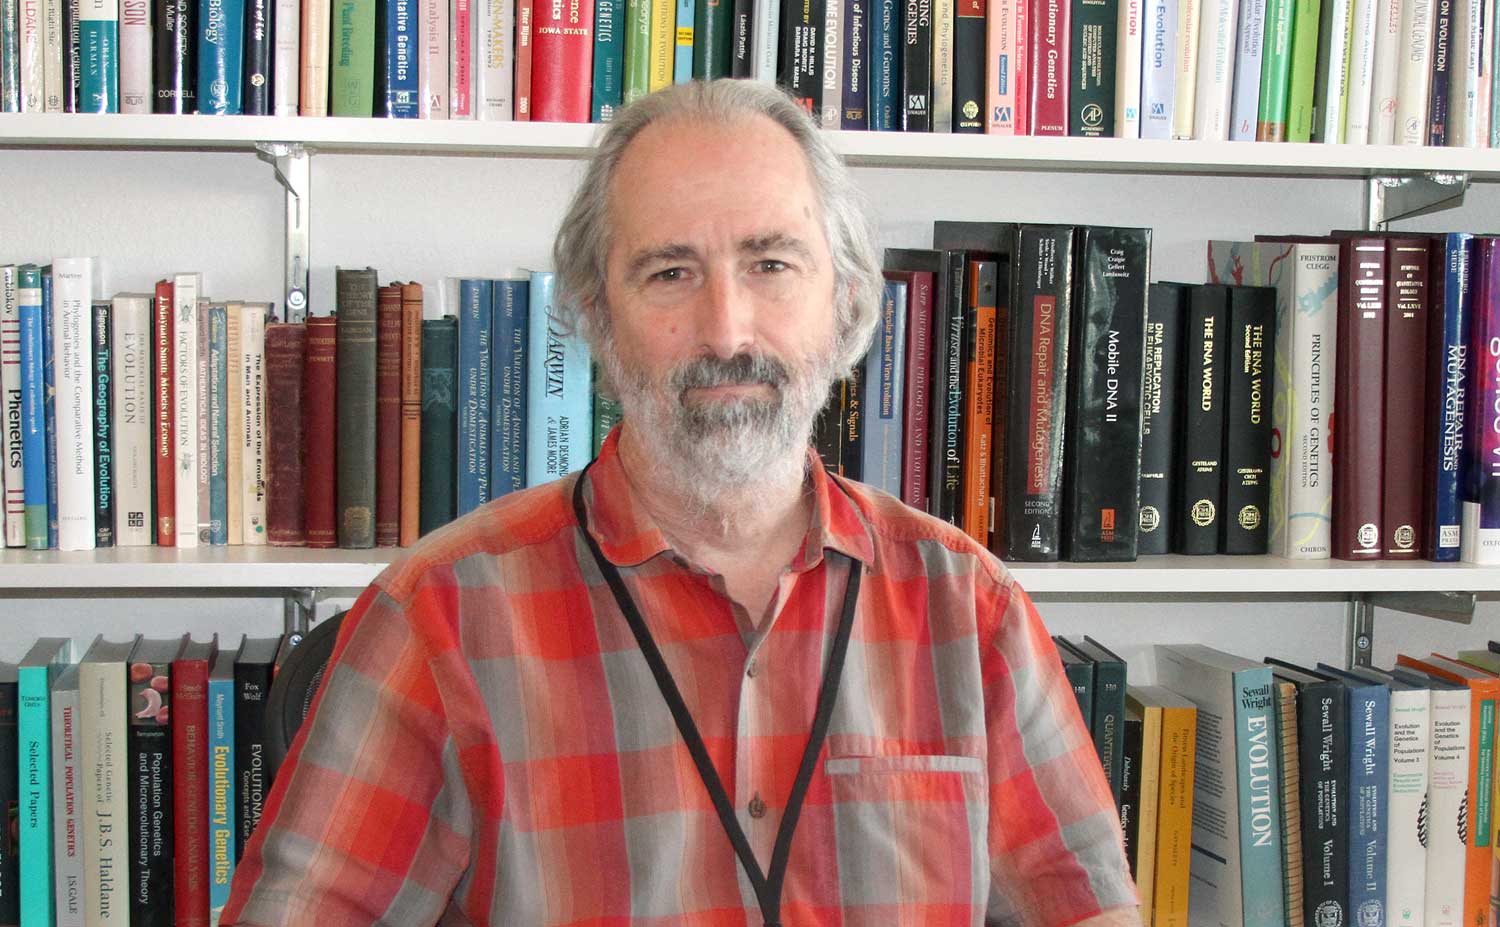 Michael Lynch is the director of the Biodesign Center for Mechanisms of Evolution and Principal Investigator for the new NSF-funded Biological Integration Institute for Mechanisms of Cellular Evolution.